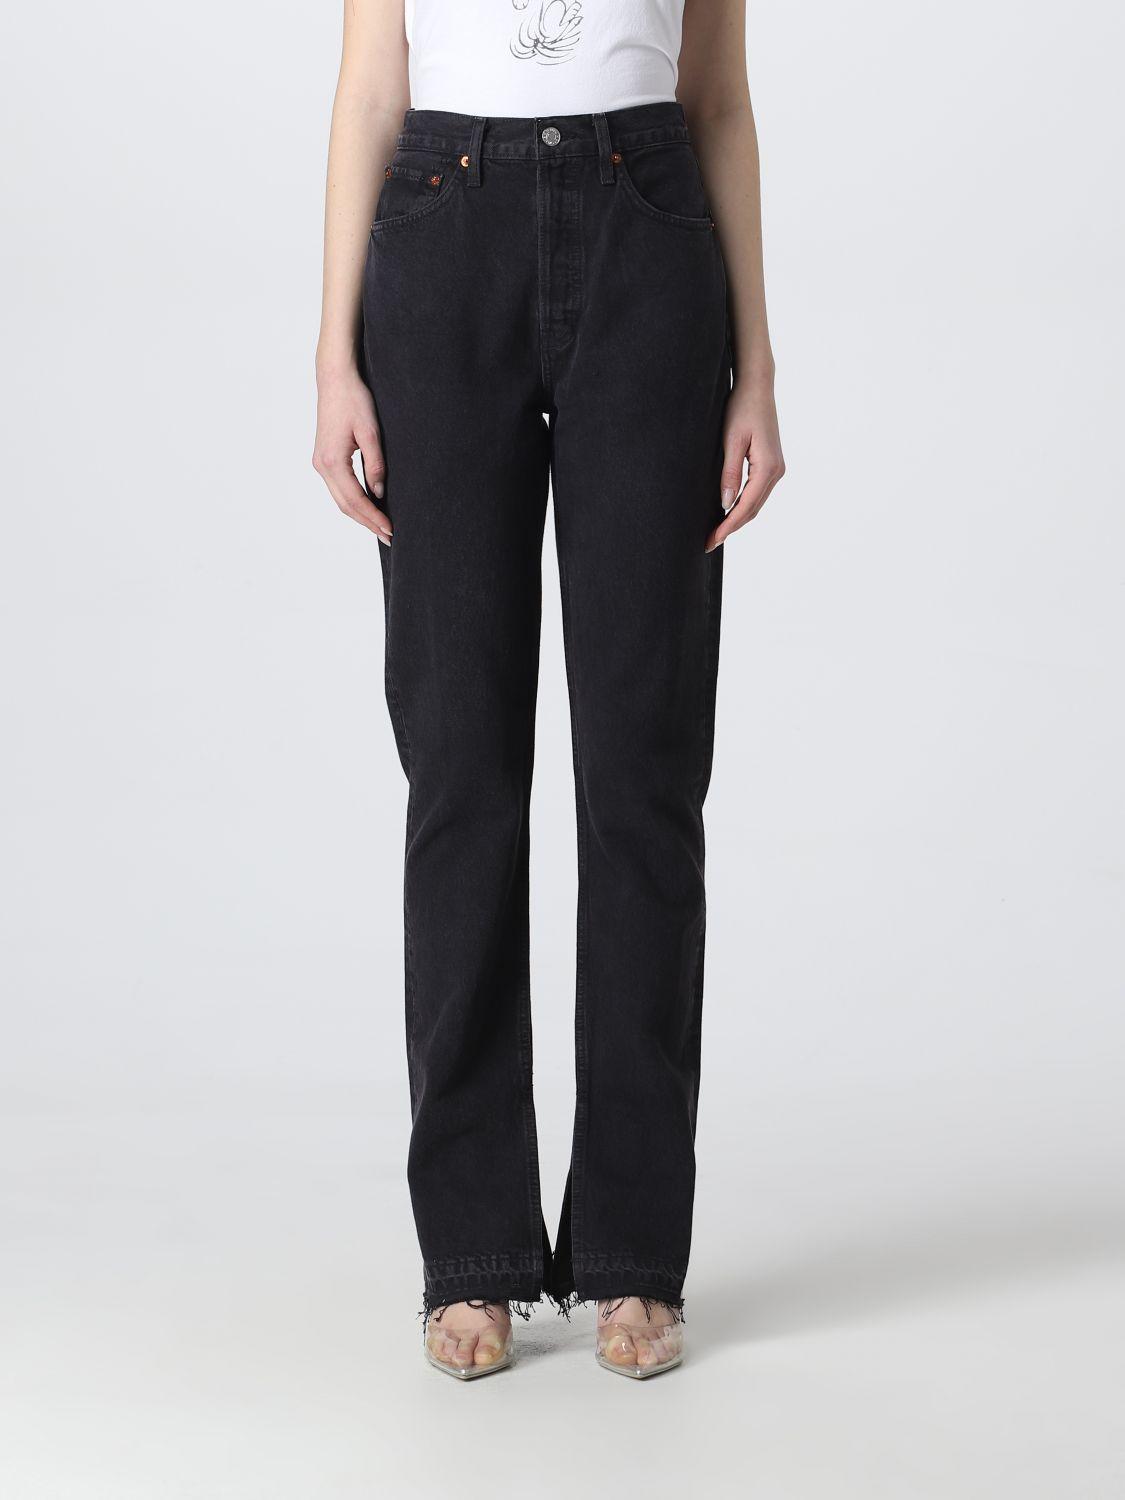 RE/DONE Jeans in Black | Lyst